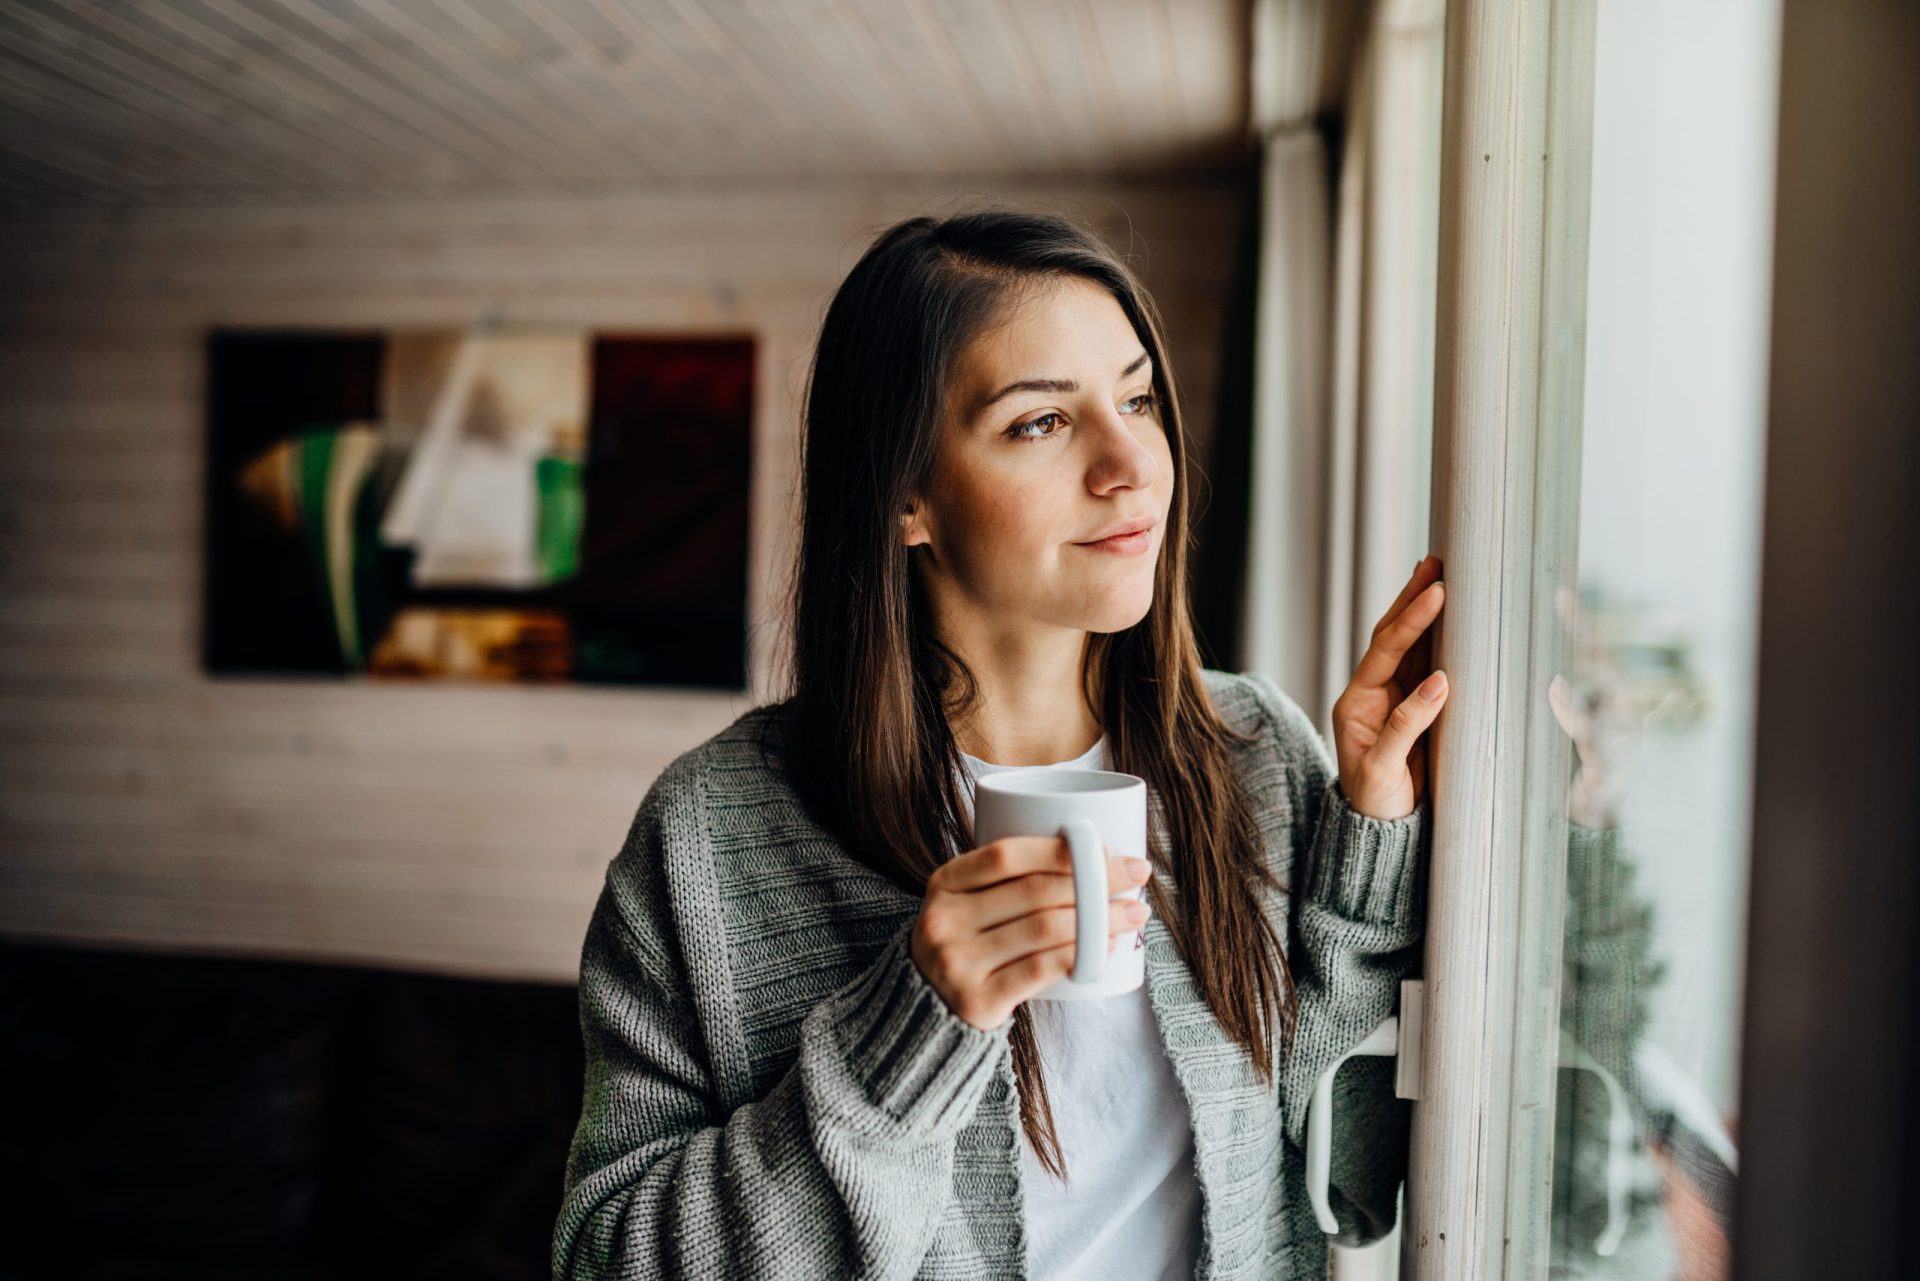 Woman looking contentedly out a window holding a cup of coffee